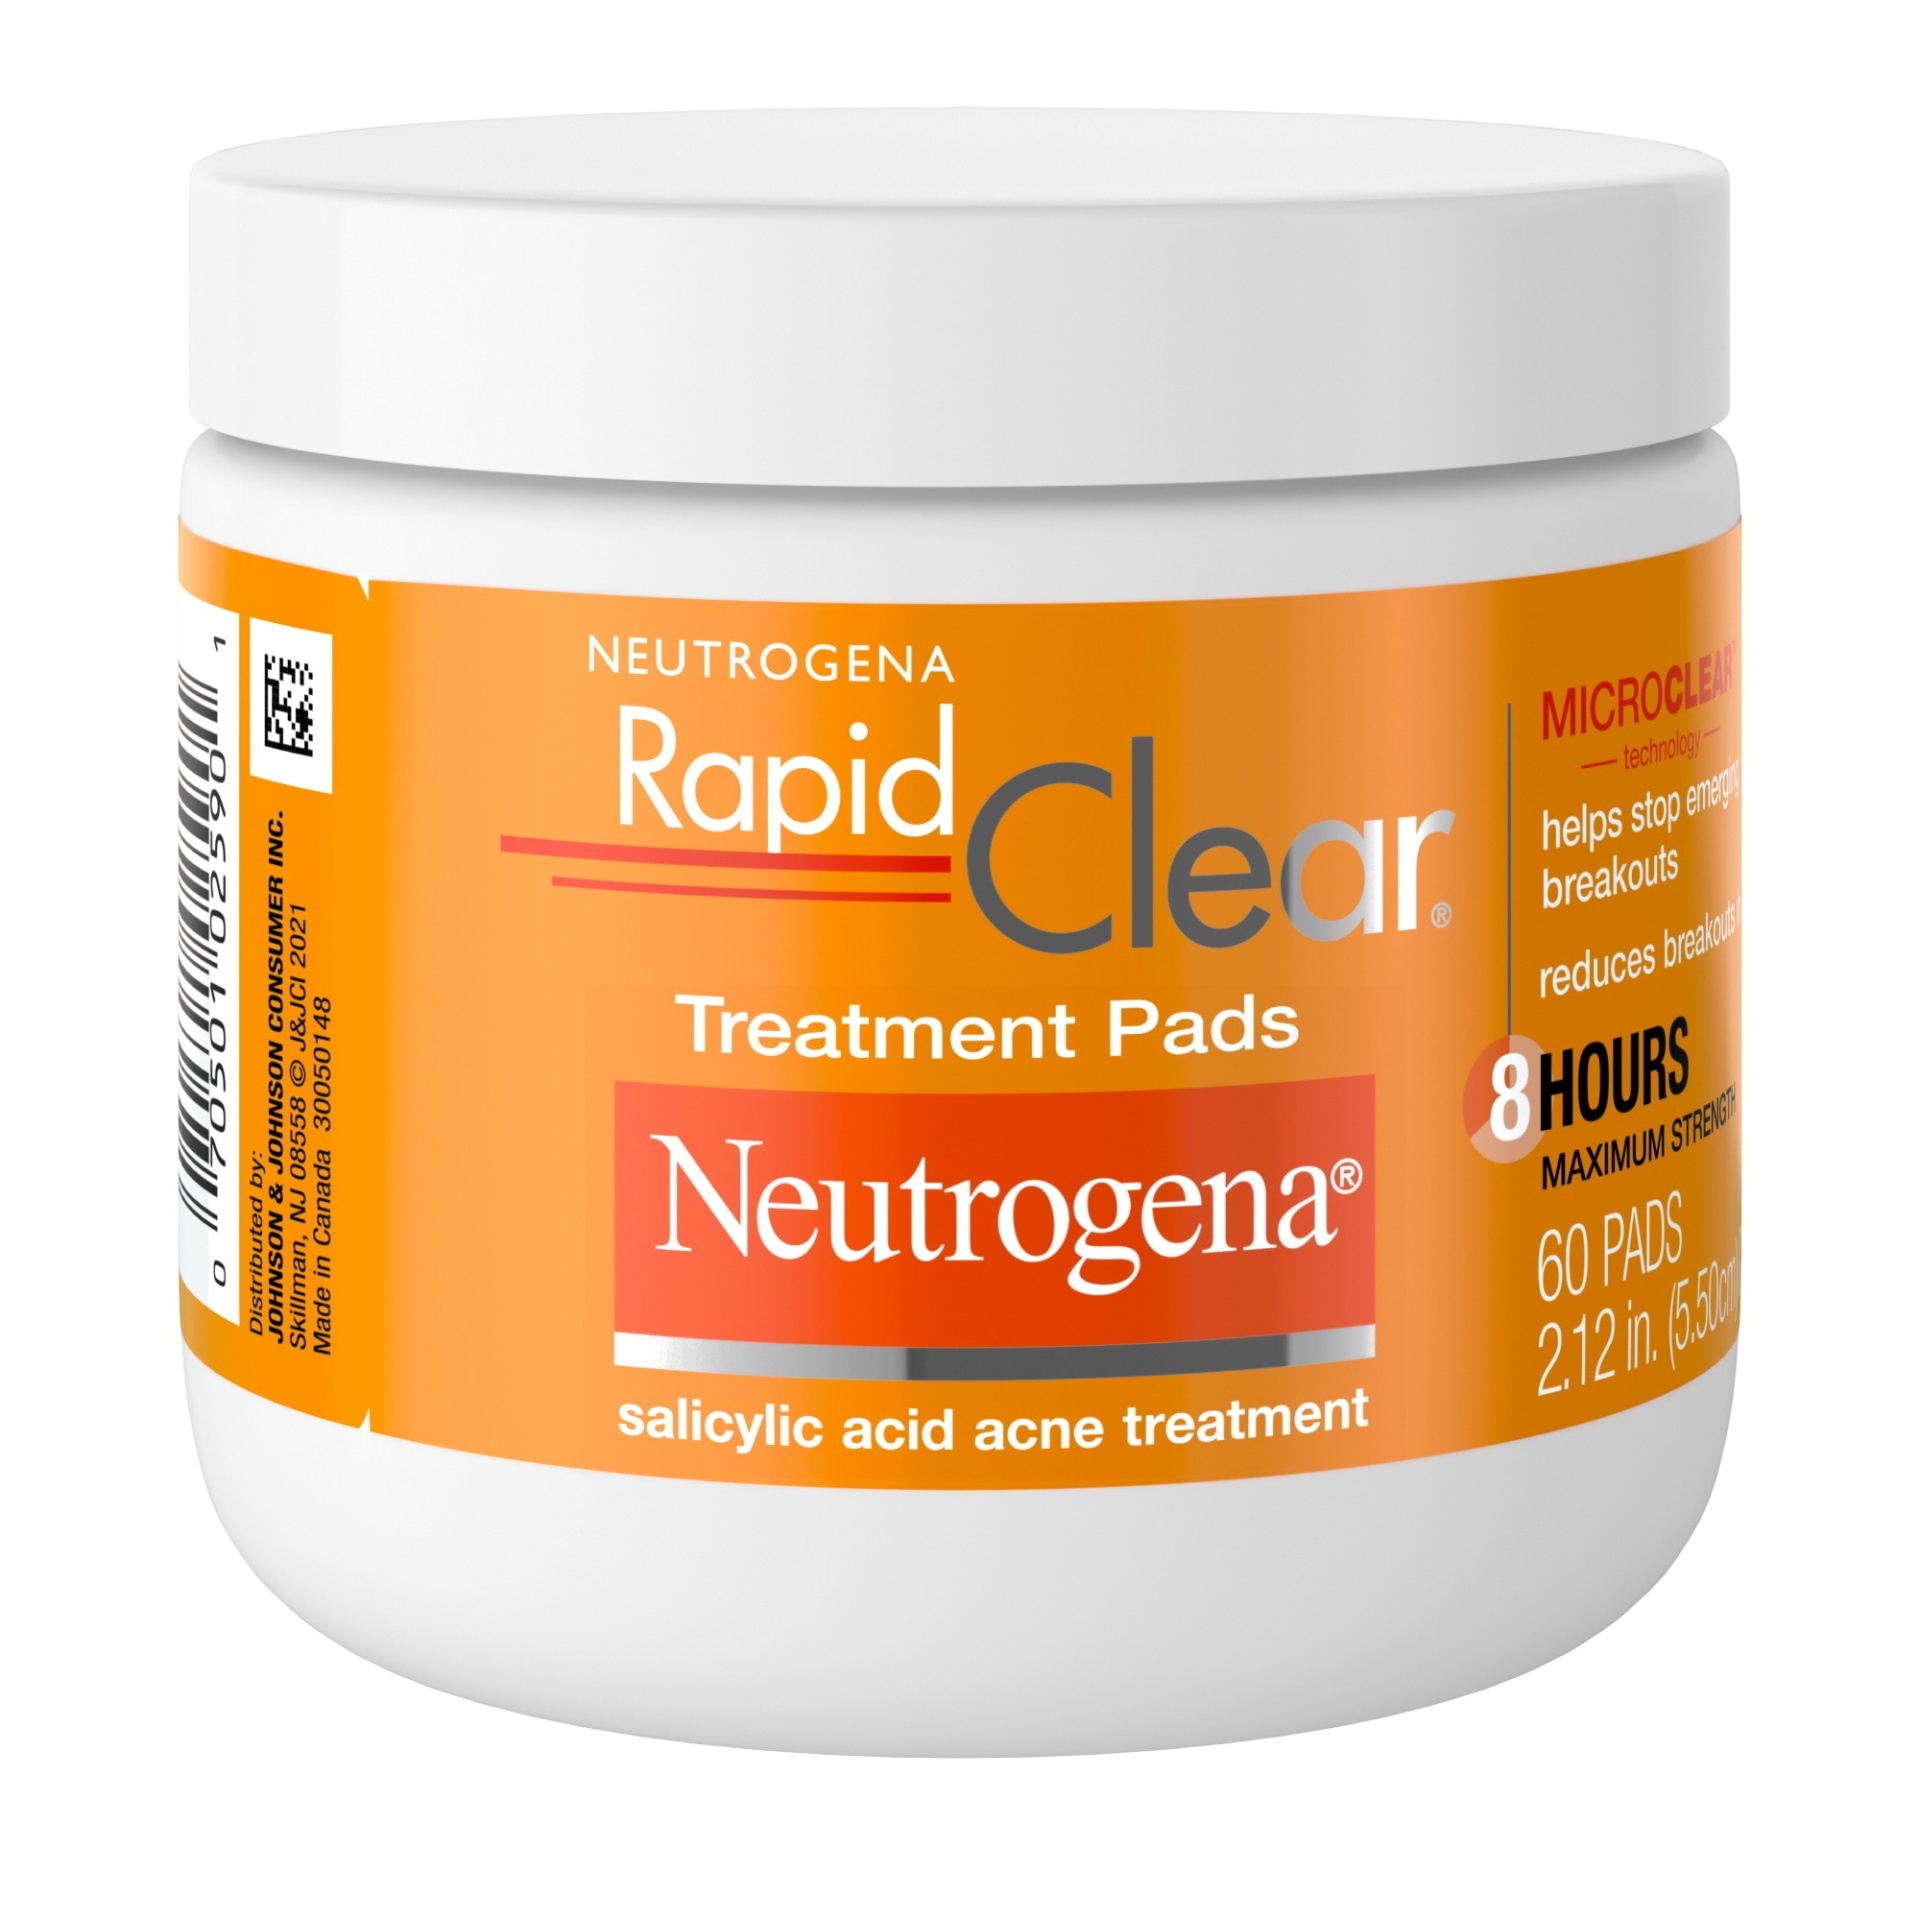 slide 1 of 5, Neutrogena Rapid Clear Maximum Strength Acne Face Pads with 2% Salicylic Acid Acne Treatment Medication to Help Fight Breakouts, Oil-Free Facial Cleansing Pads for Acne-Prone Skin, 60 ct